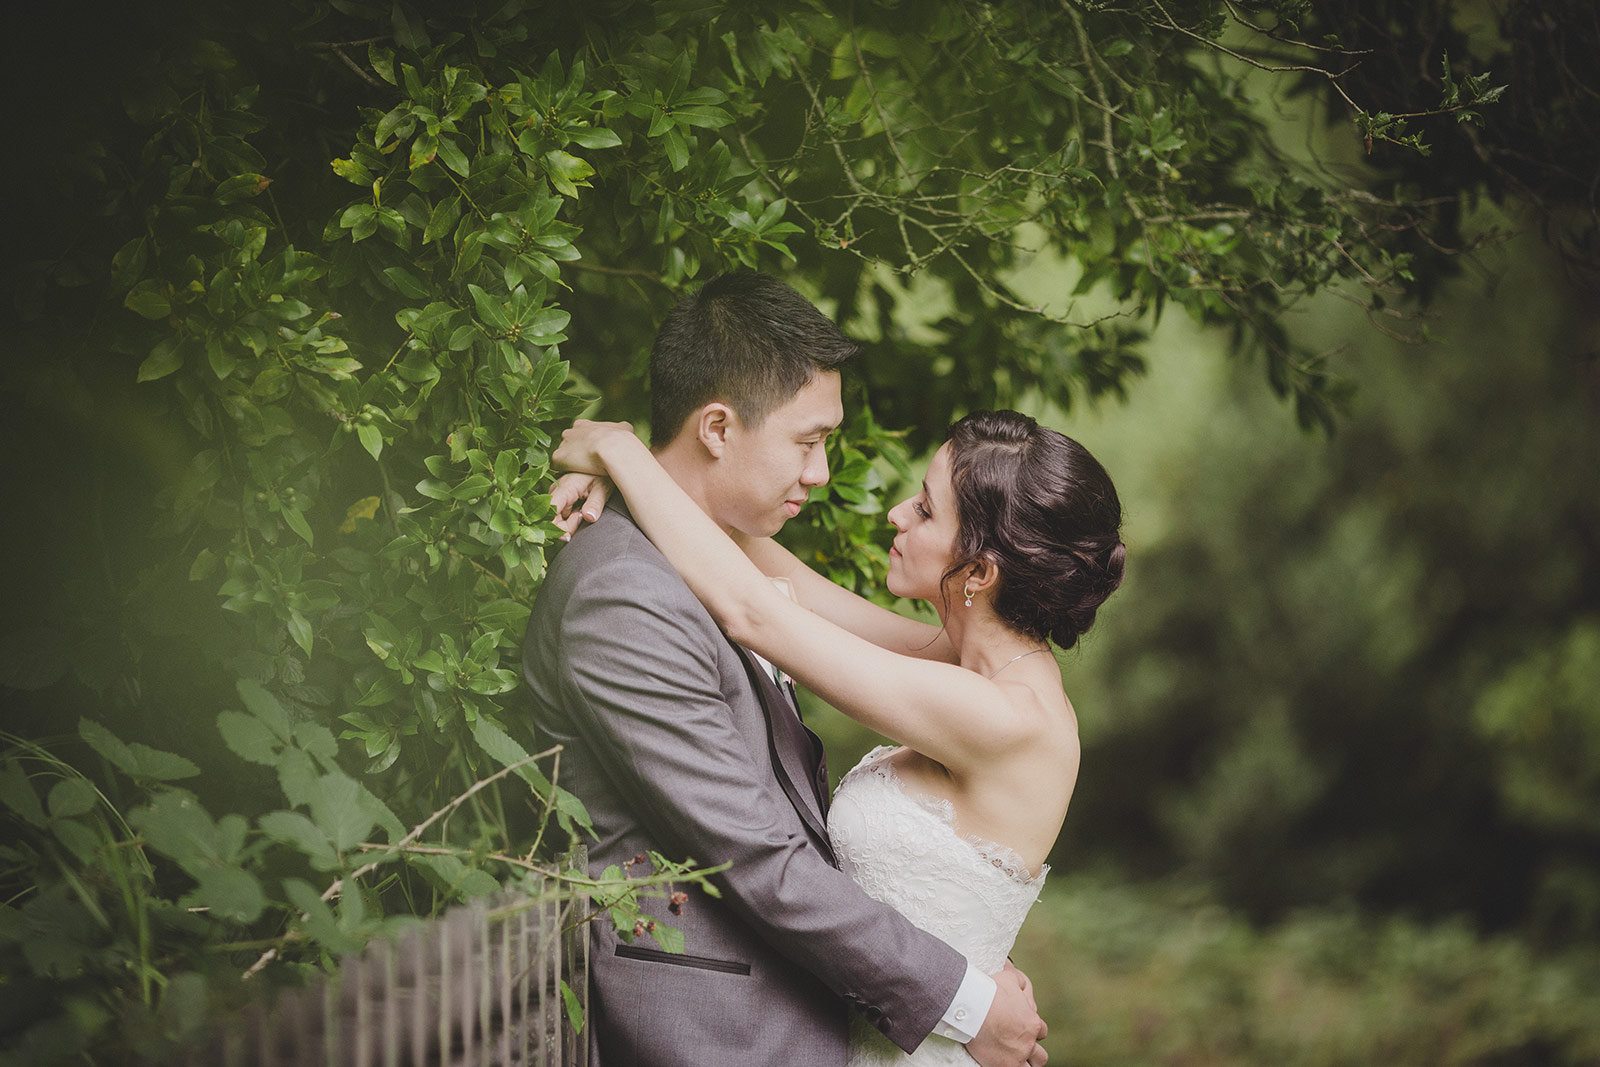 A man and woman embracing in front of trees.